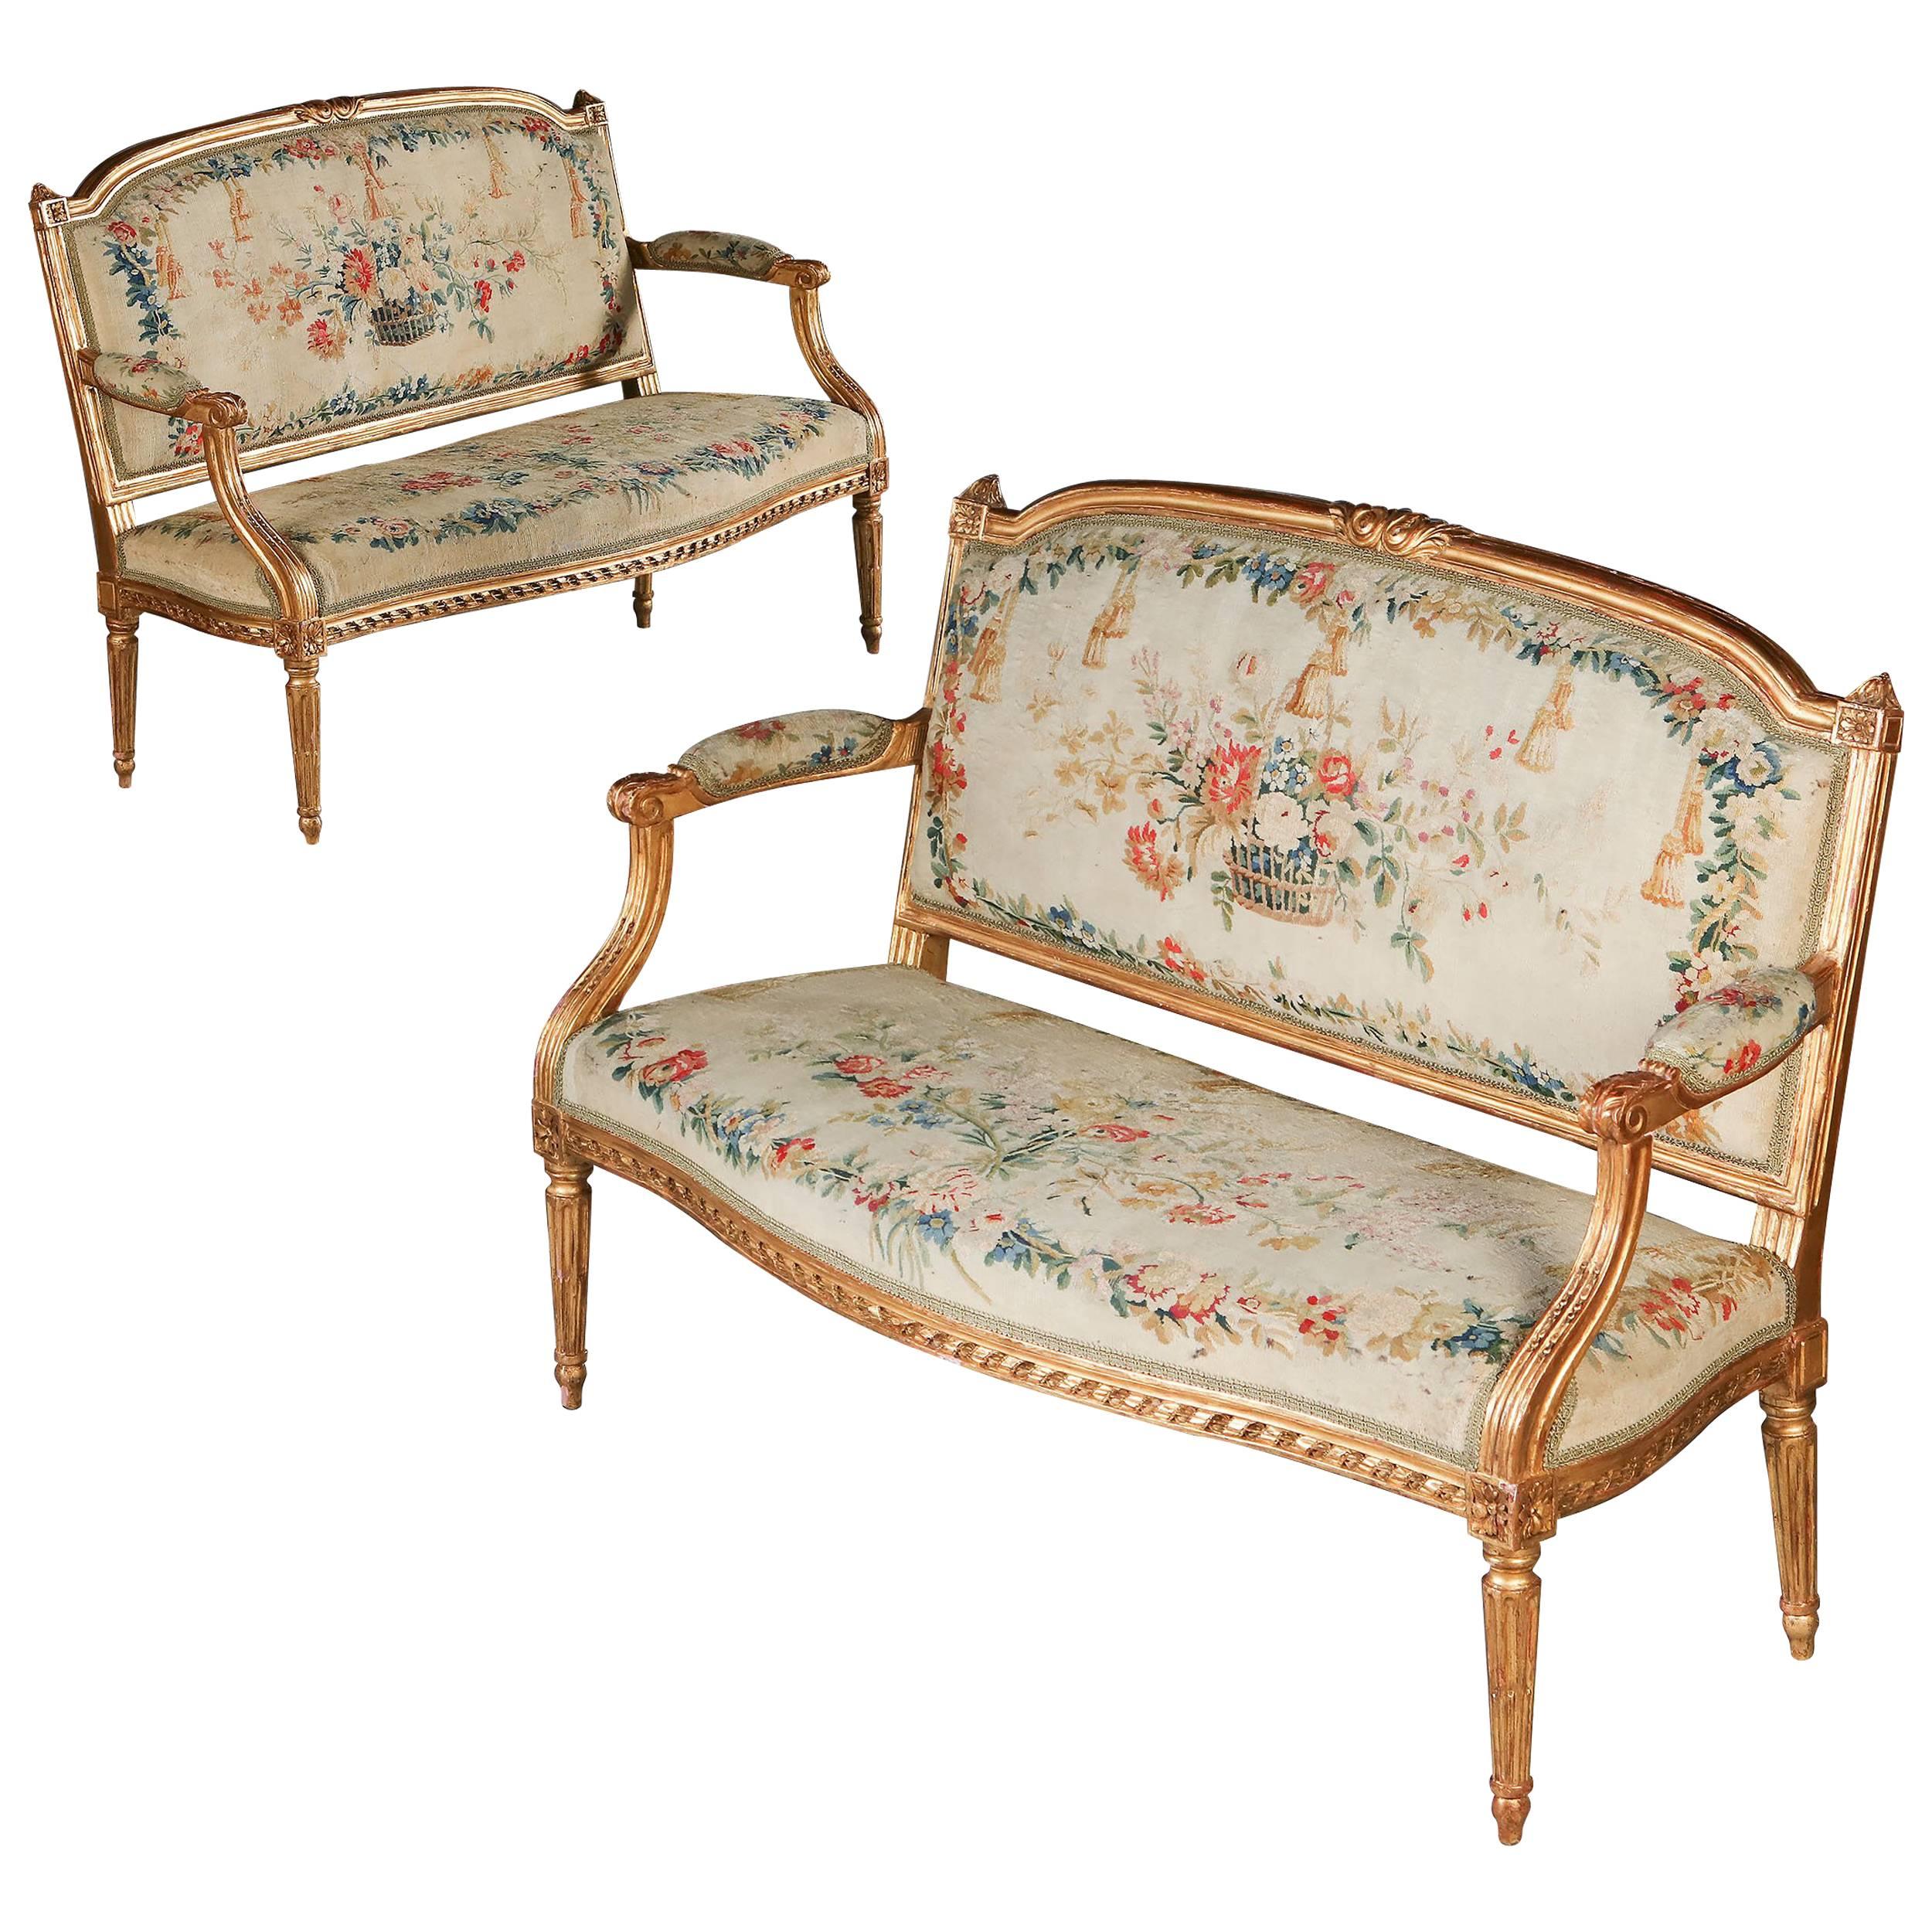 Pair 18th Century Neoclassical Louis XVI Marquise Chairs Stamped Pierre Laroque